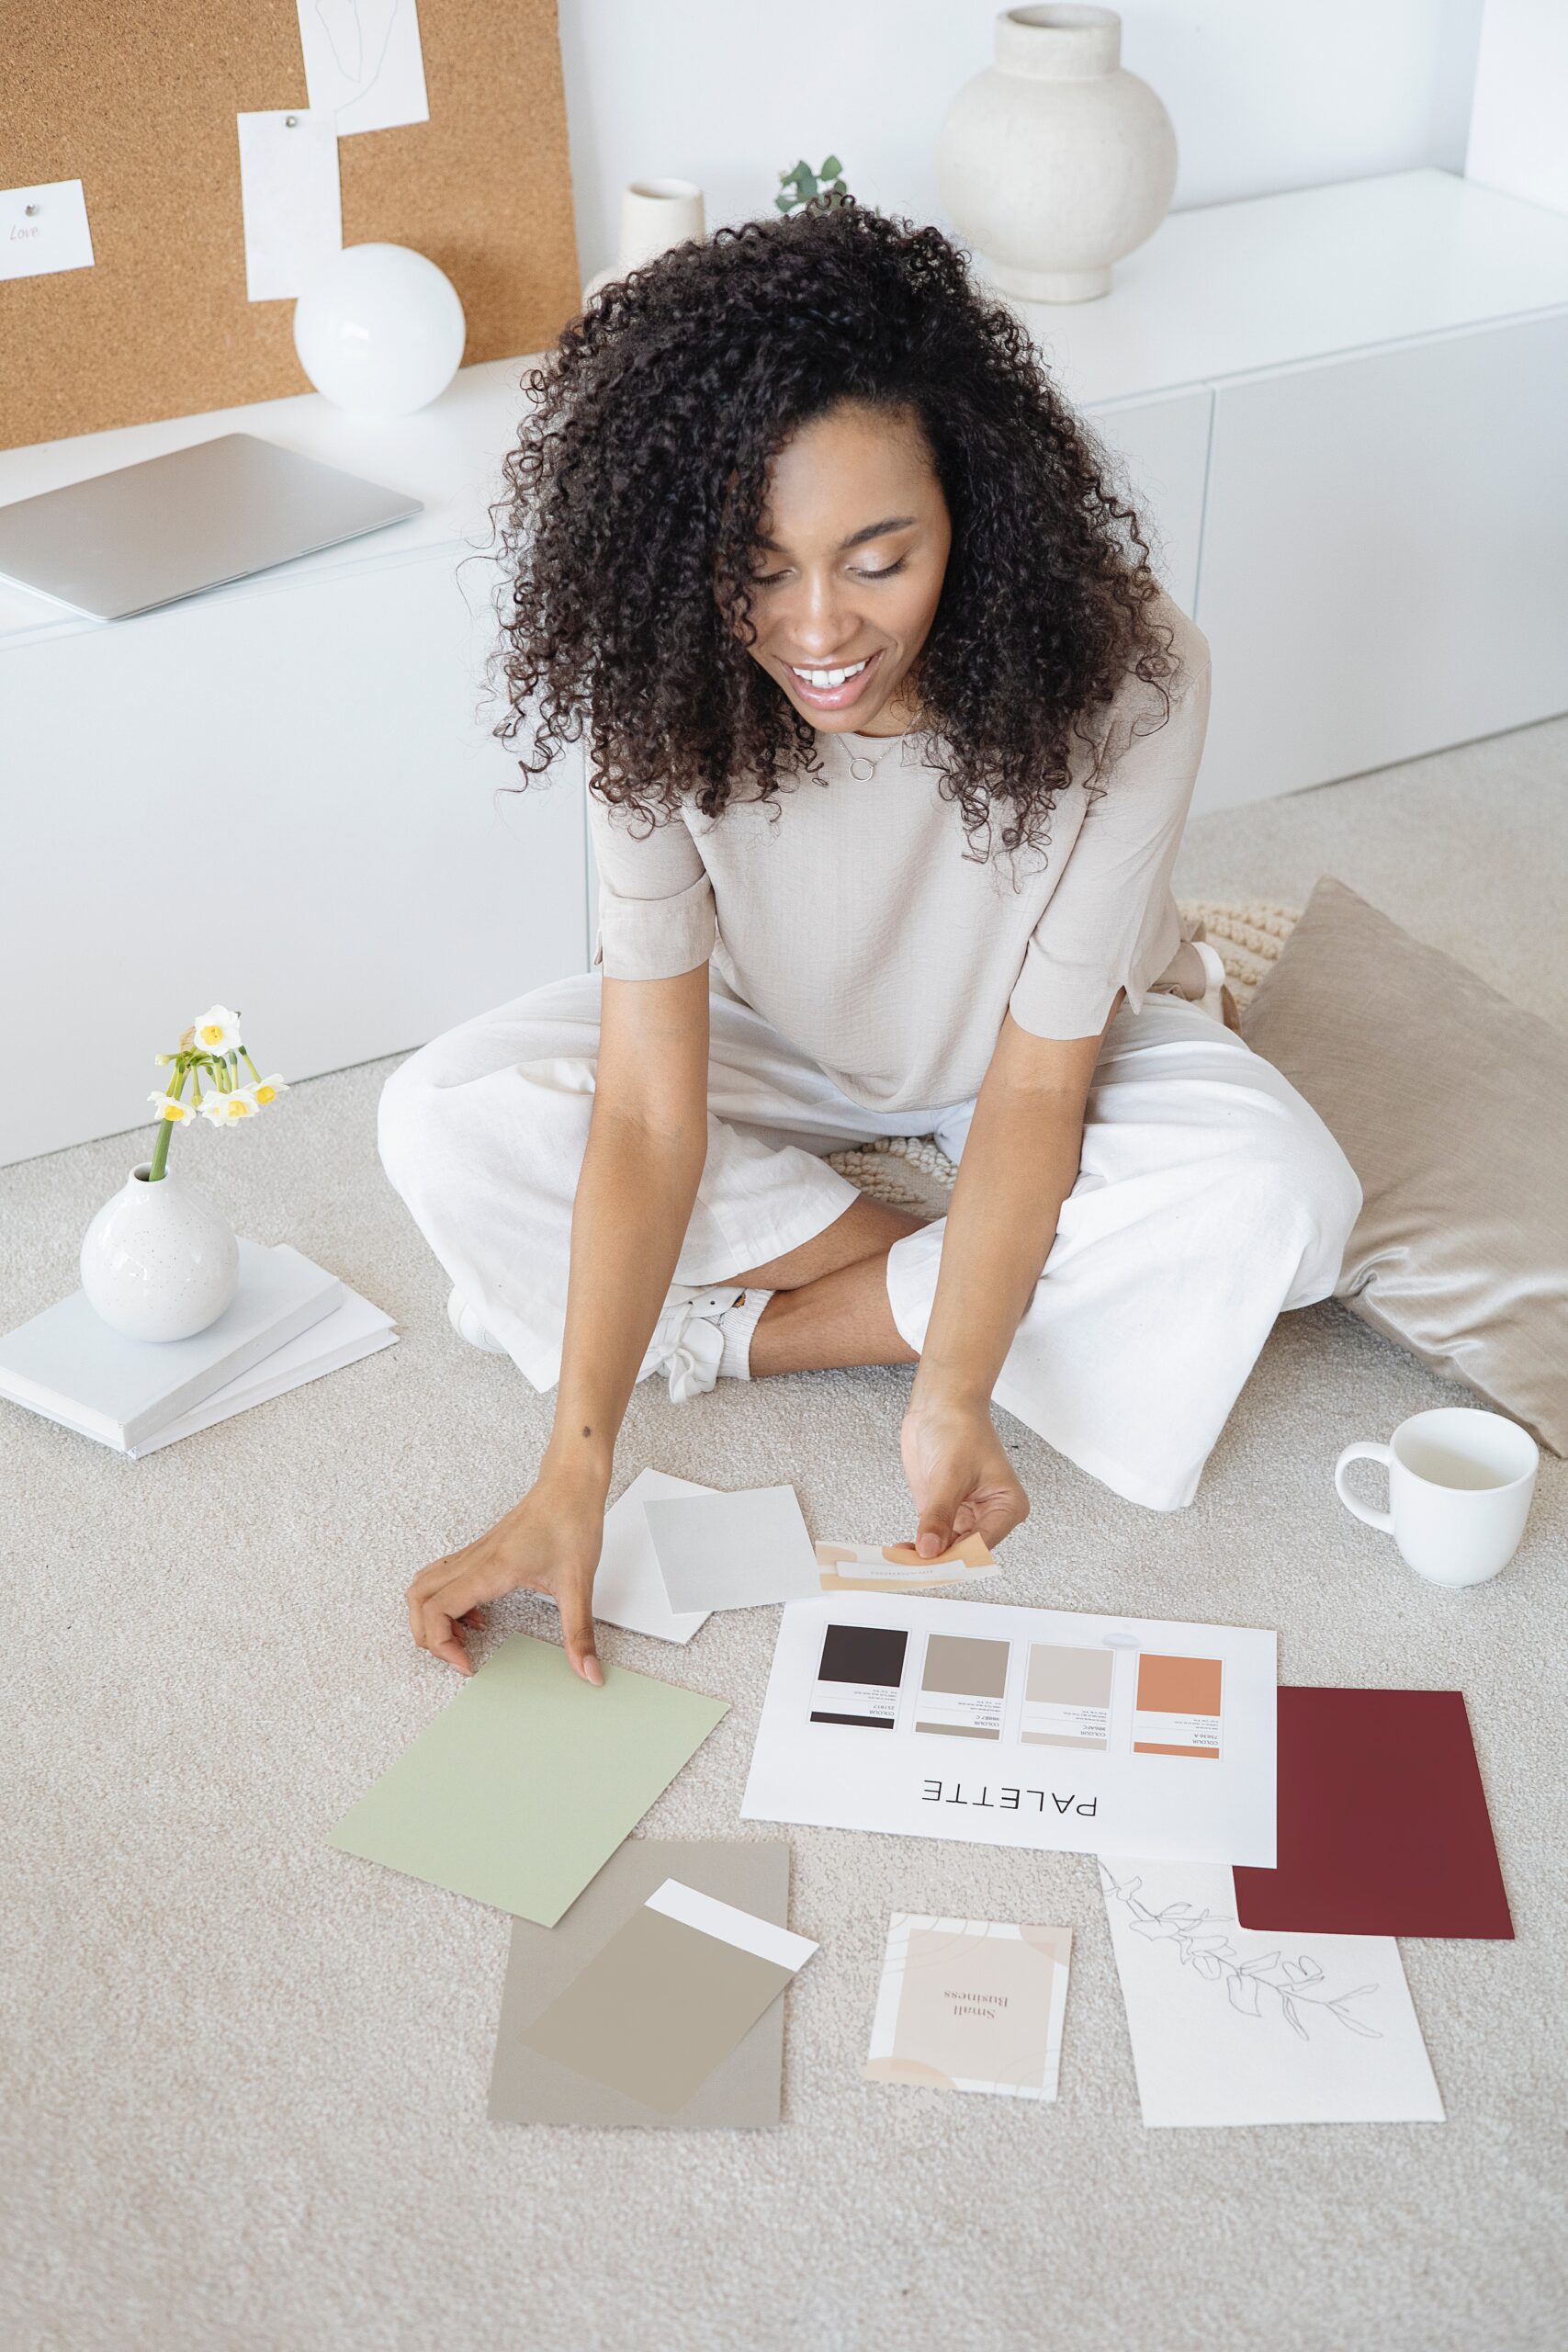 A young woman sitting on the floor with color swatches in front of her, seemingly creating a color scheme for a project